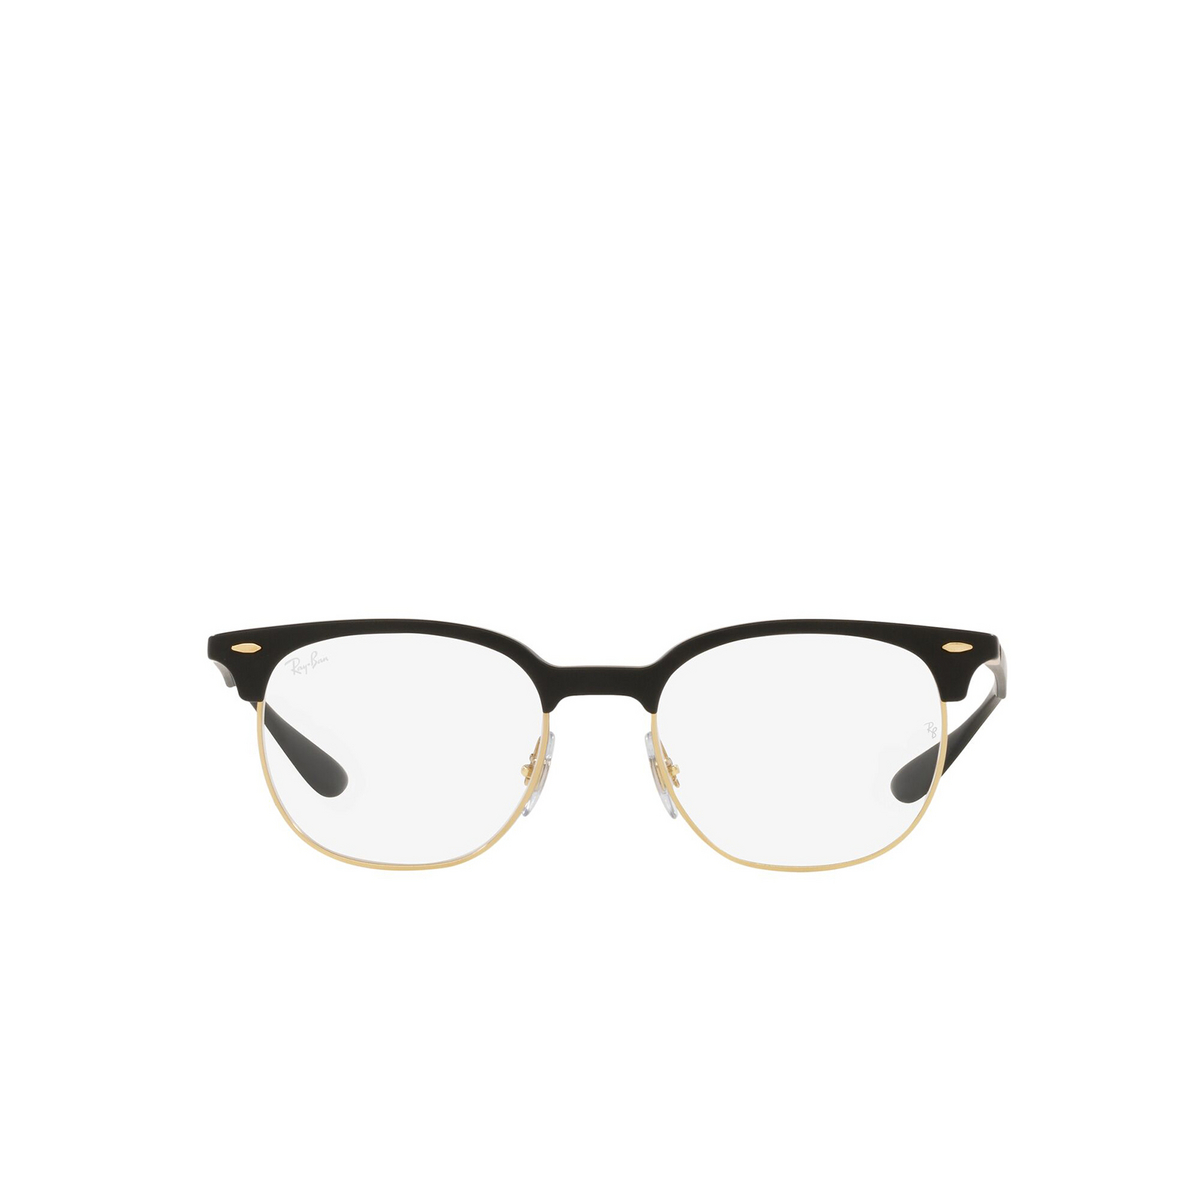 Ray-Ban® Square Eyeglasses: RX7186 color Sand Black 8151 - front view.